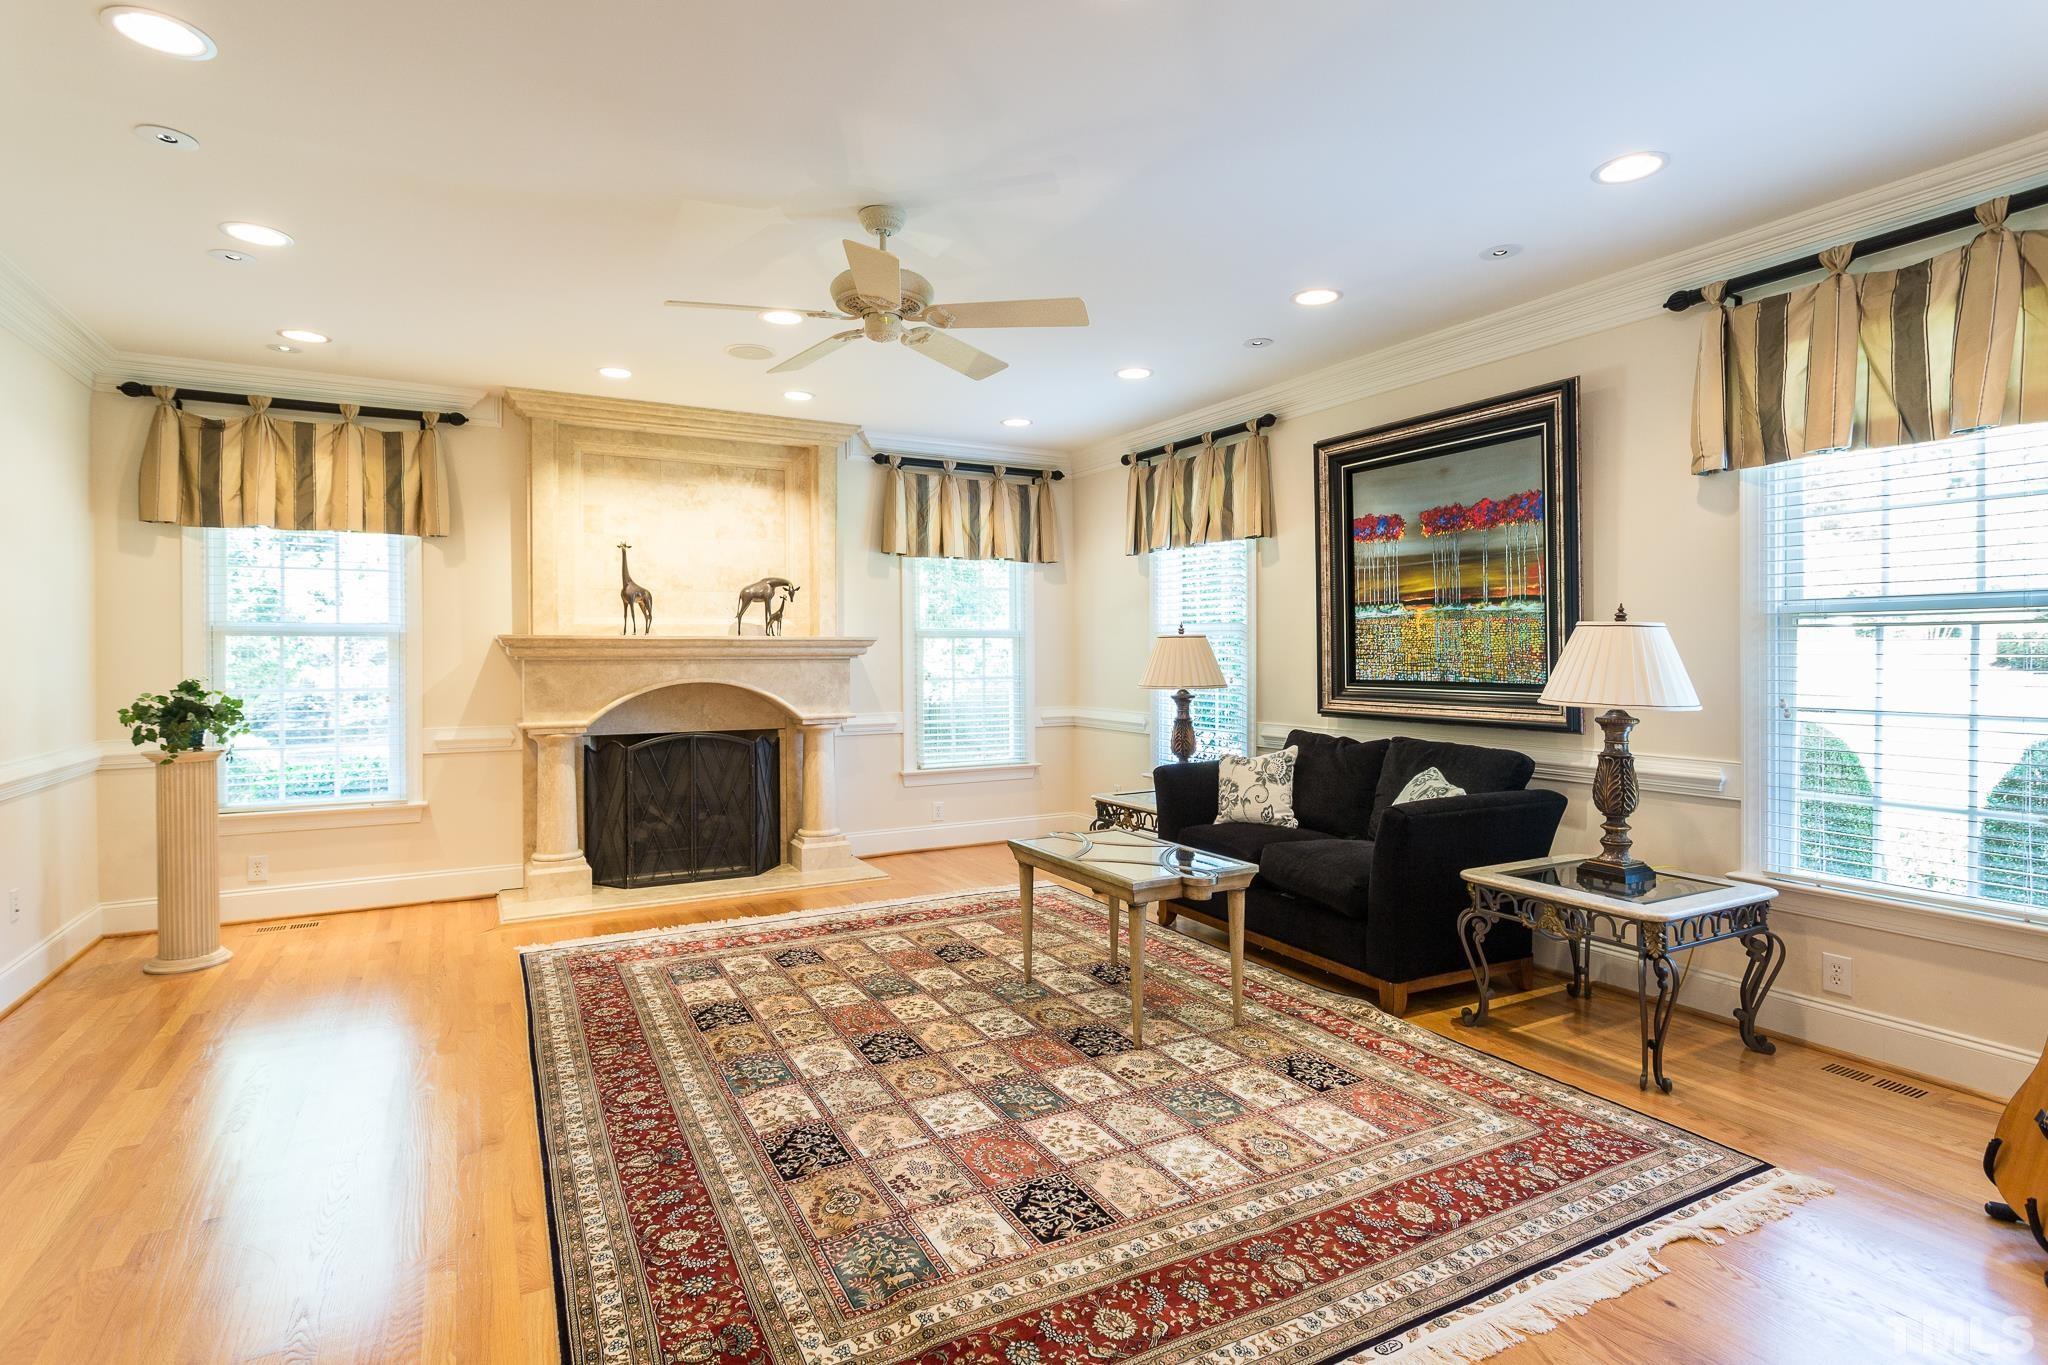 This quite retreat is located in the east wing of the home and was part of the 2006 addition.  This beautiful room has been used as a magnificent home office and a music room. A stately gas fireplace with stone surround is the central feature of the room.